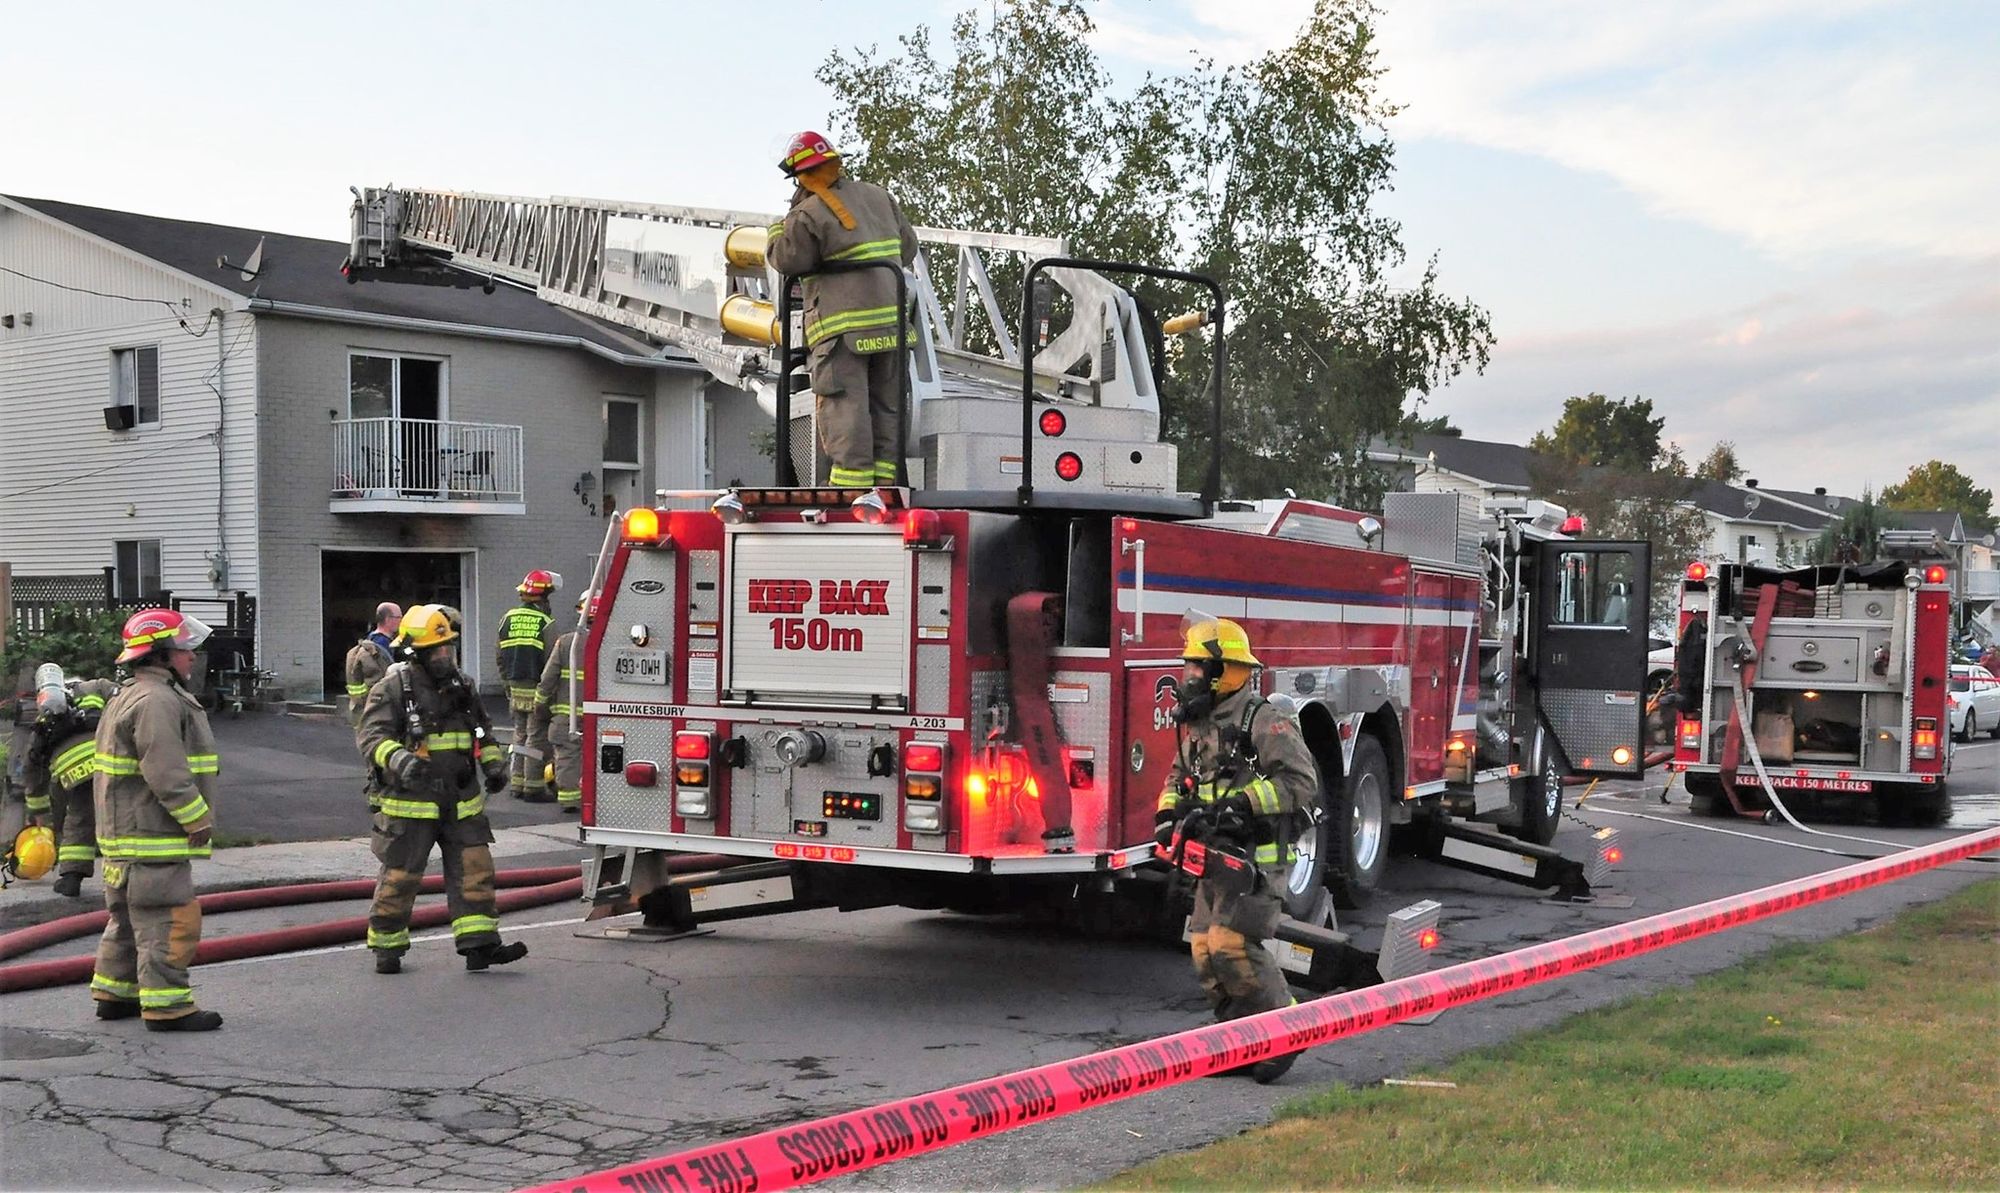 Online fundraiser set up for family after kitchen fire causes damage to home in Hawkesbury